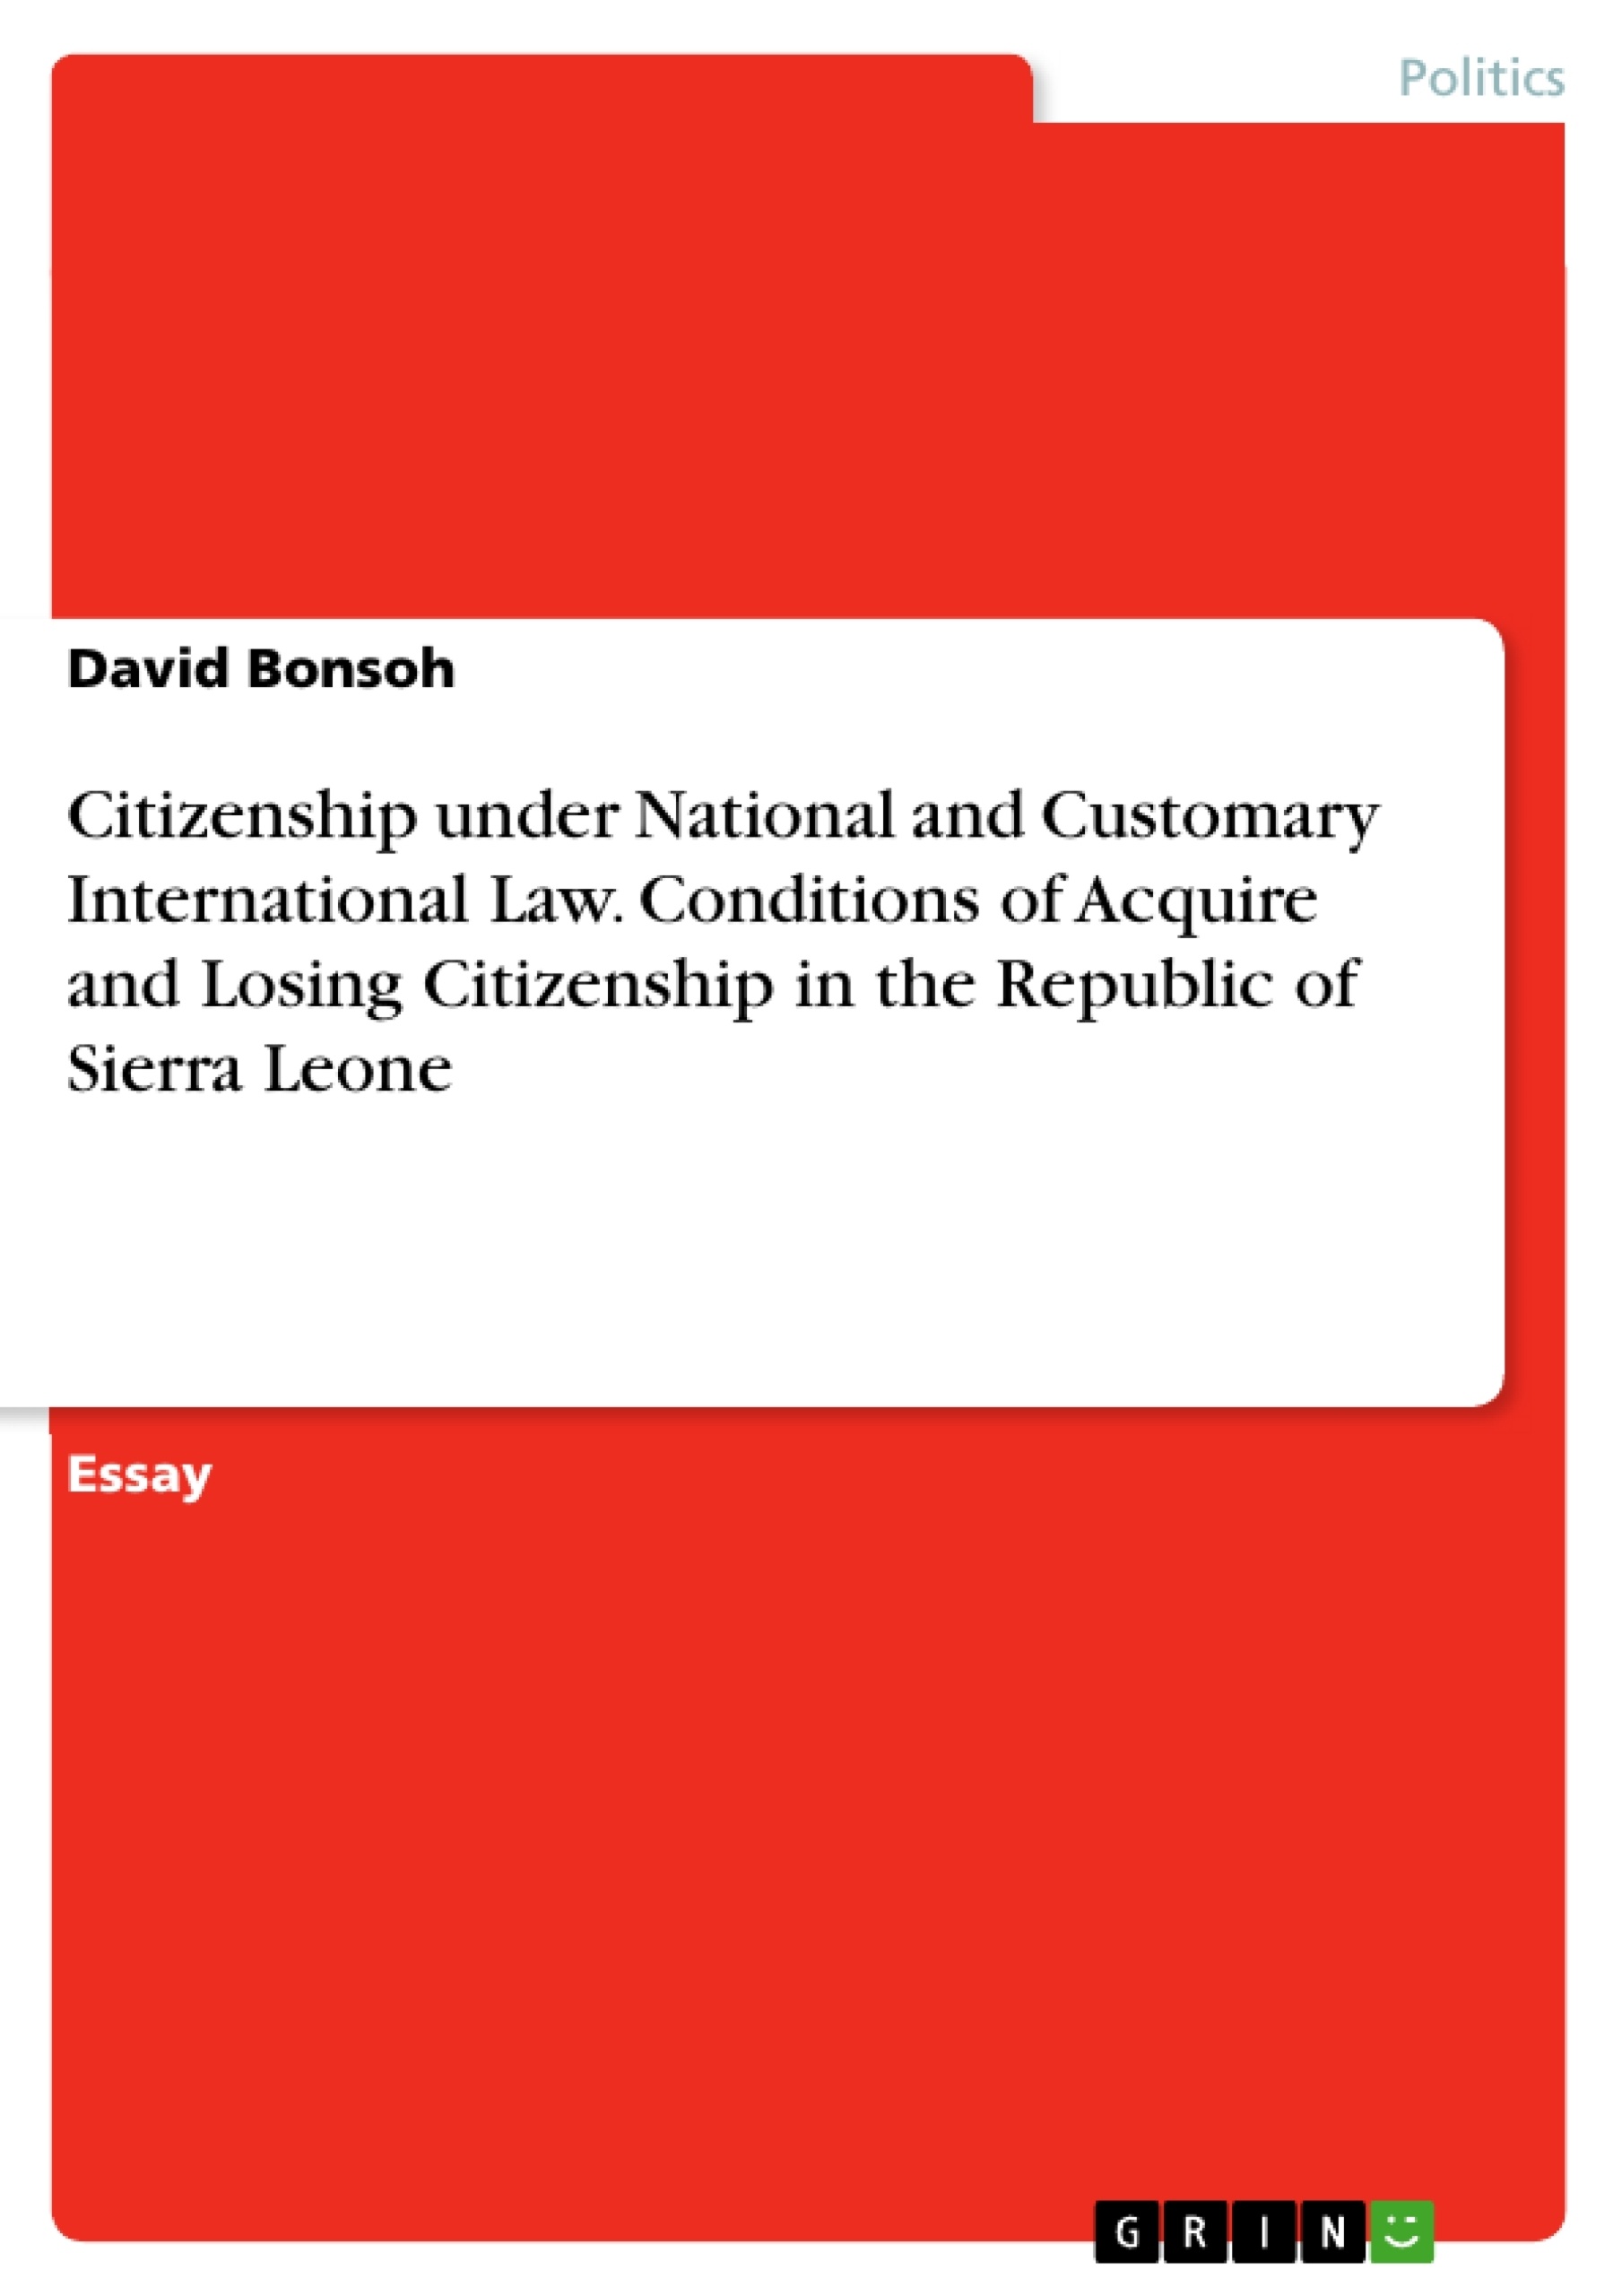 Title: Citizenship under National and Customary International Law. Conditions of Acquire and Losing Citizenship in the Republic of Sierra Leone